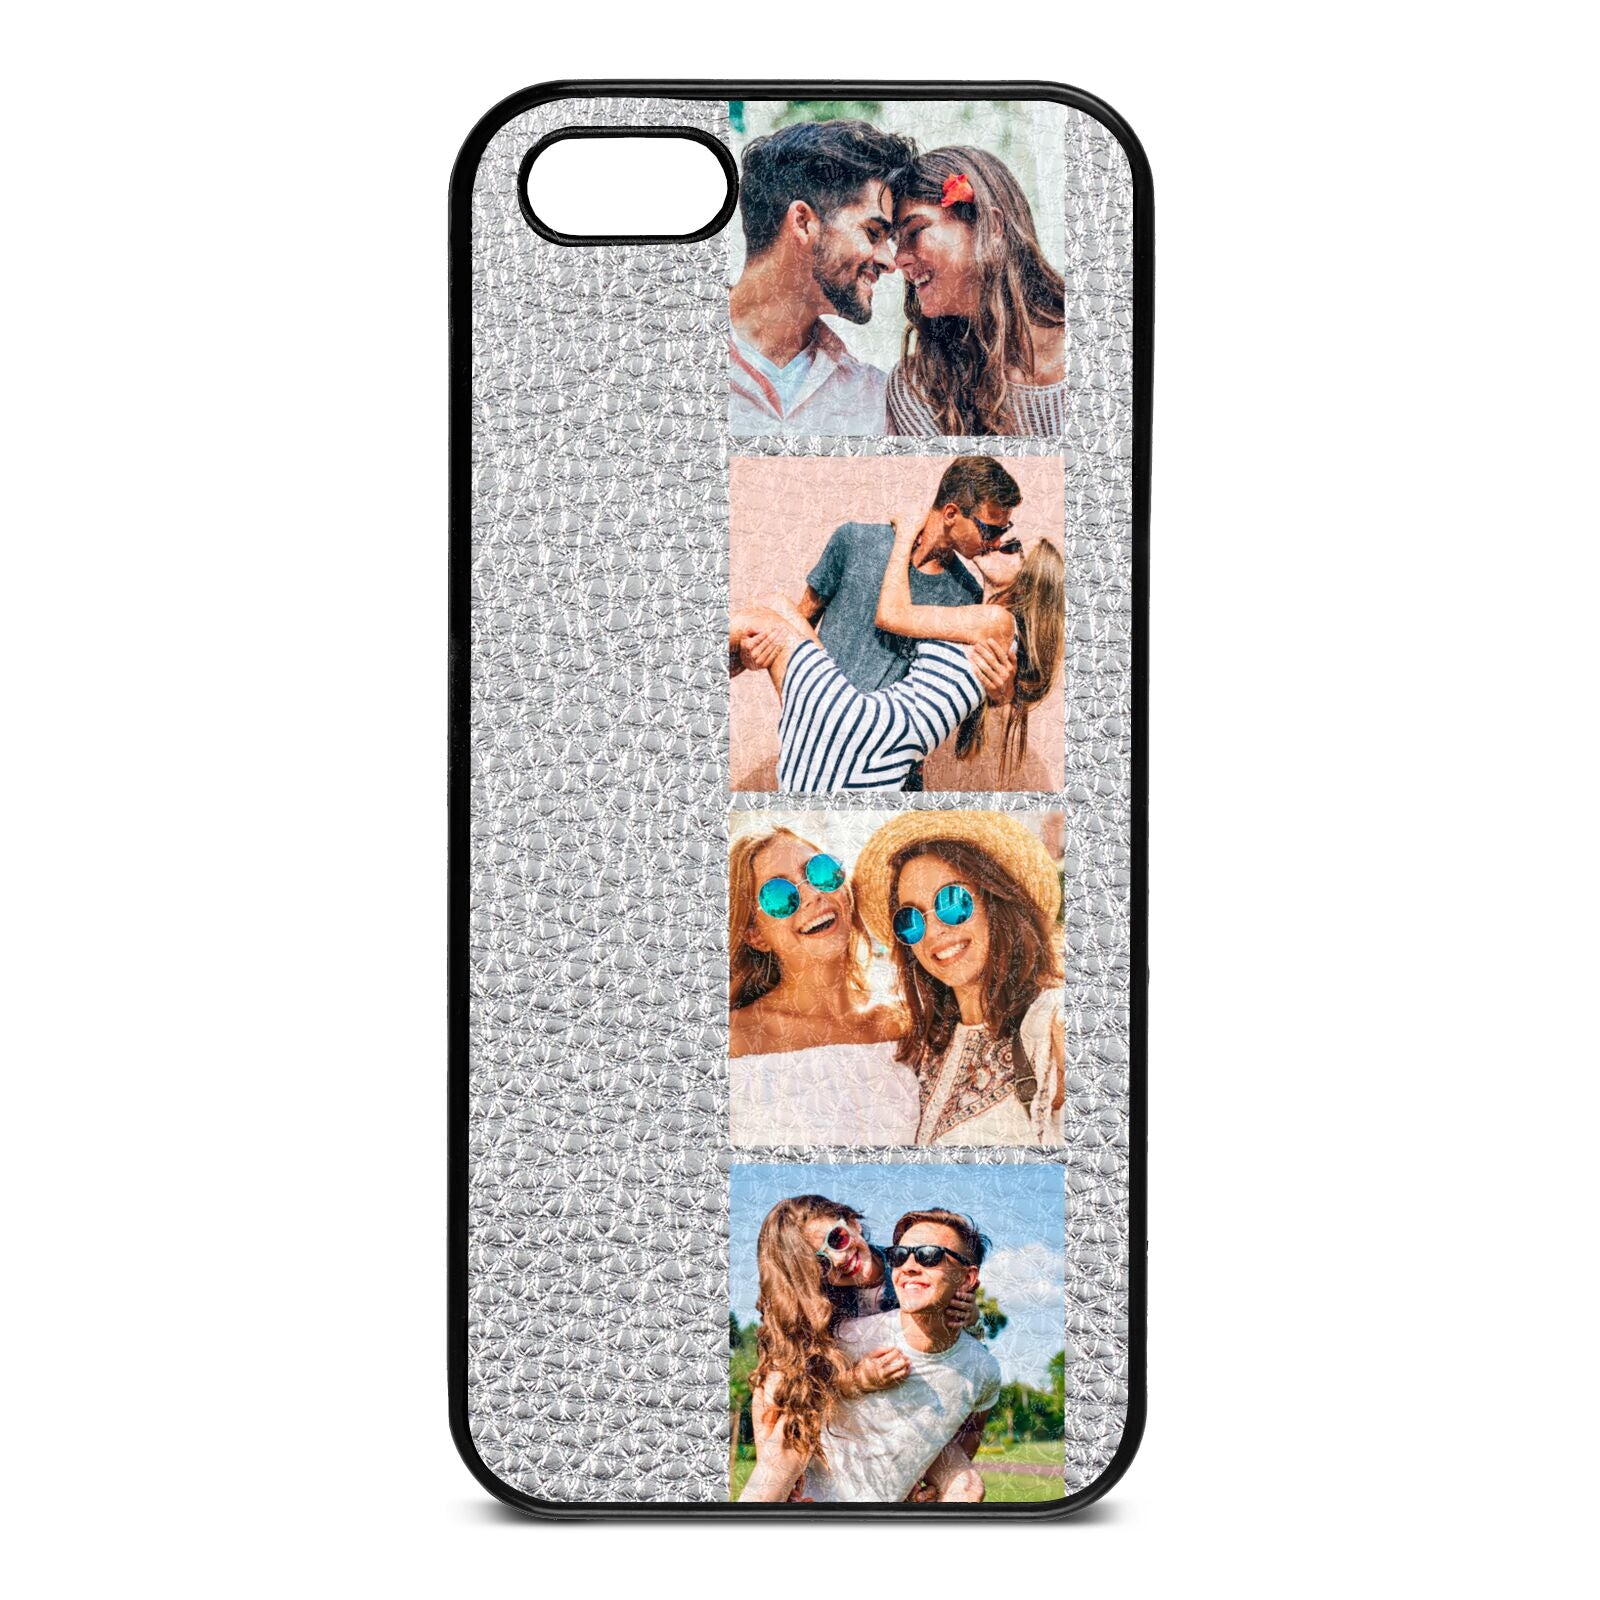 Photo Strip Montage Upload Silver Pebble Leather iPhone 5 Case